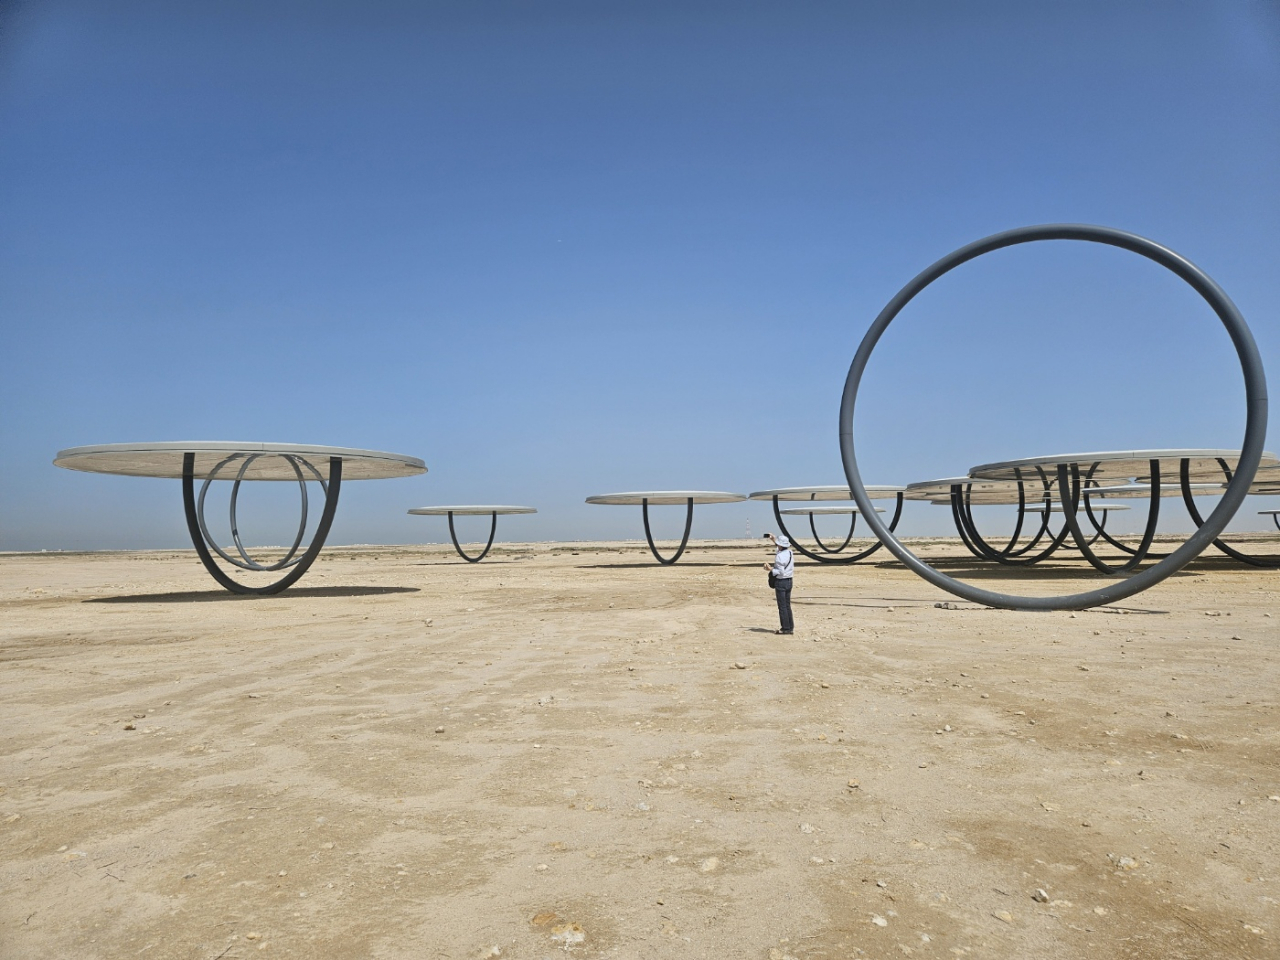 A visitor takes photos of Olafur Eliasson's “Shadows Traveling on the Sea of the Day” in the Qatari desert, Feb. 24. (Park Yuna/The Korea Herald)